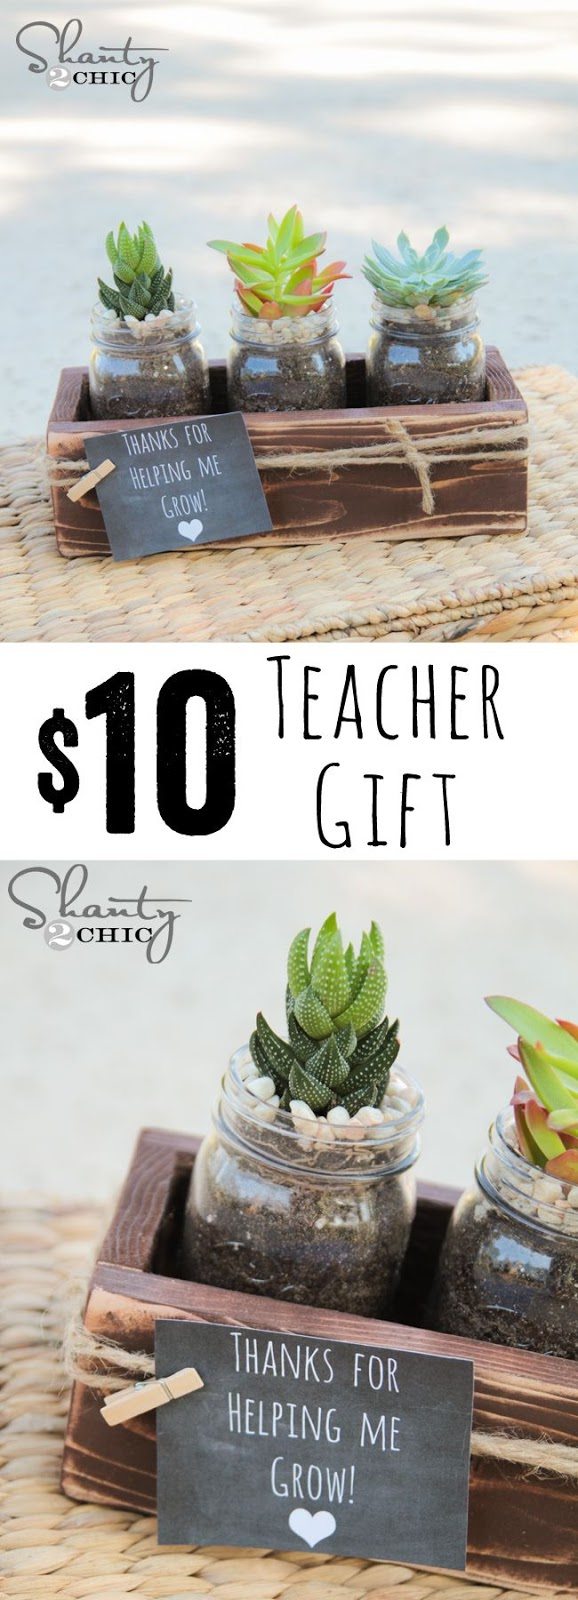 Teacher Gift - $10 succulent with FREE plans and printable via Shanty 2 Chic